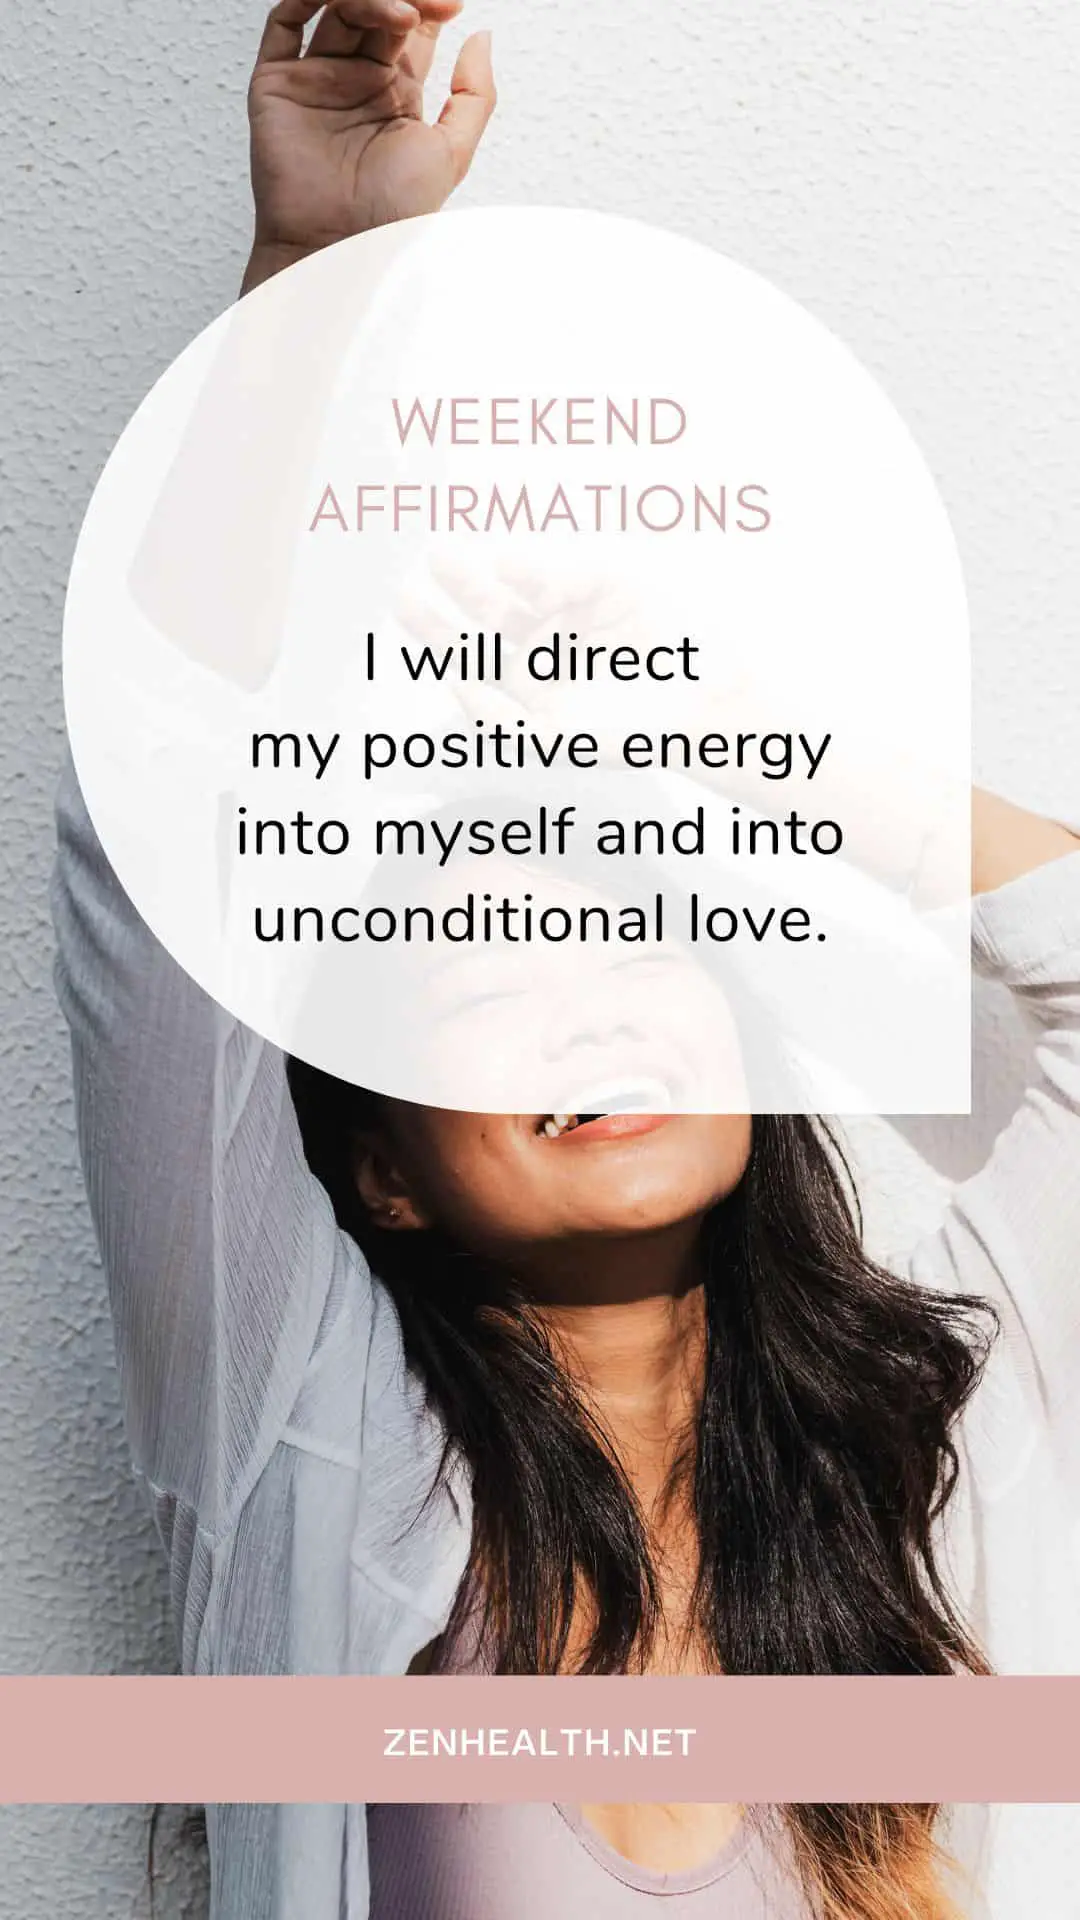 weekend affirmations: I will direct my positive energy into myself and into unconditional love